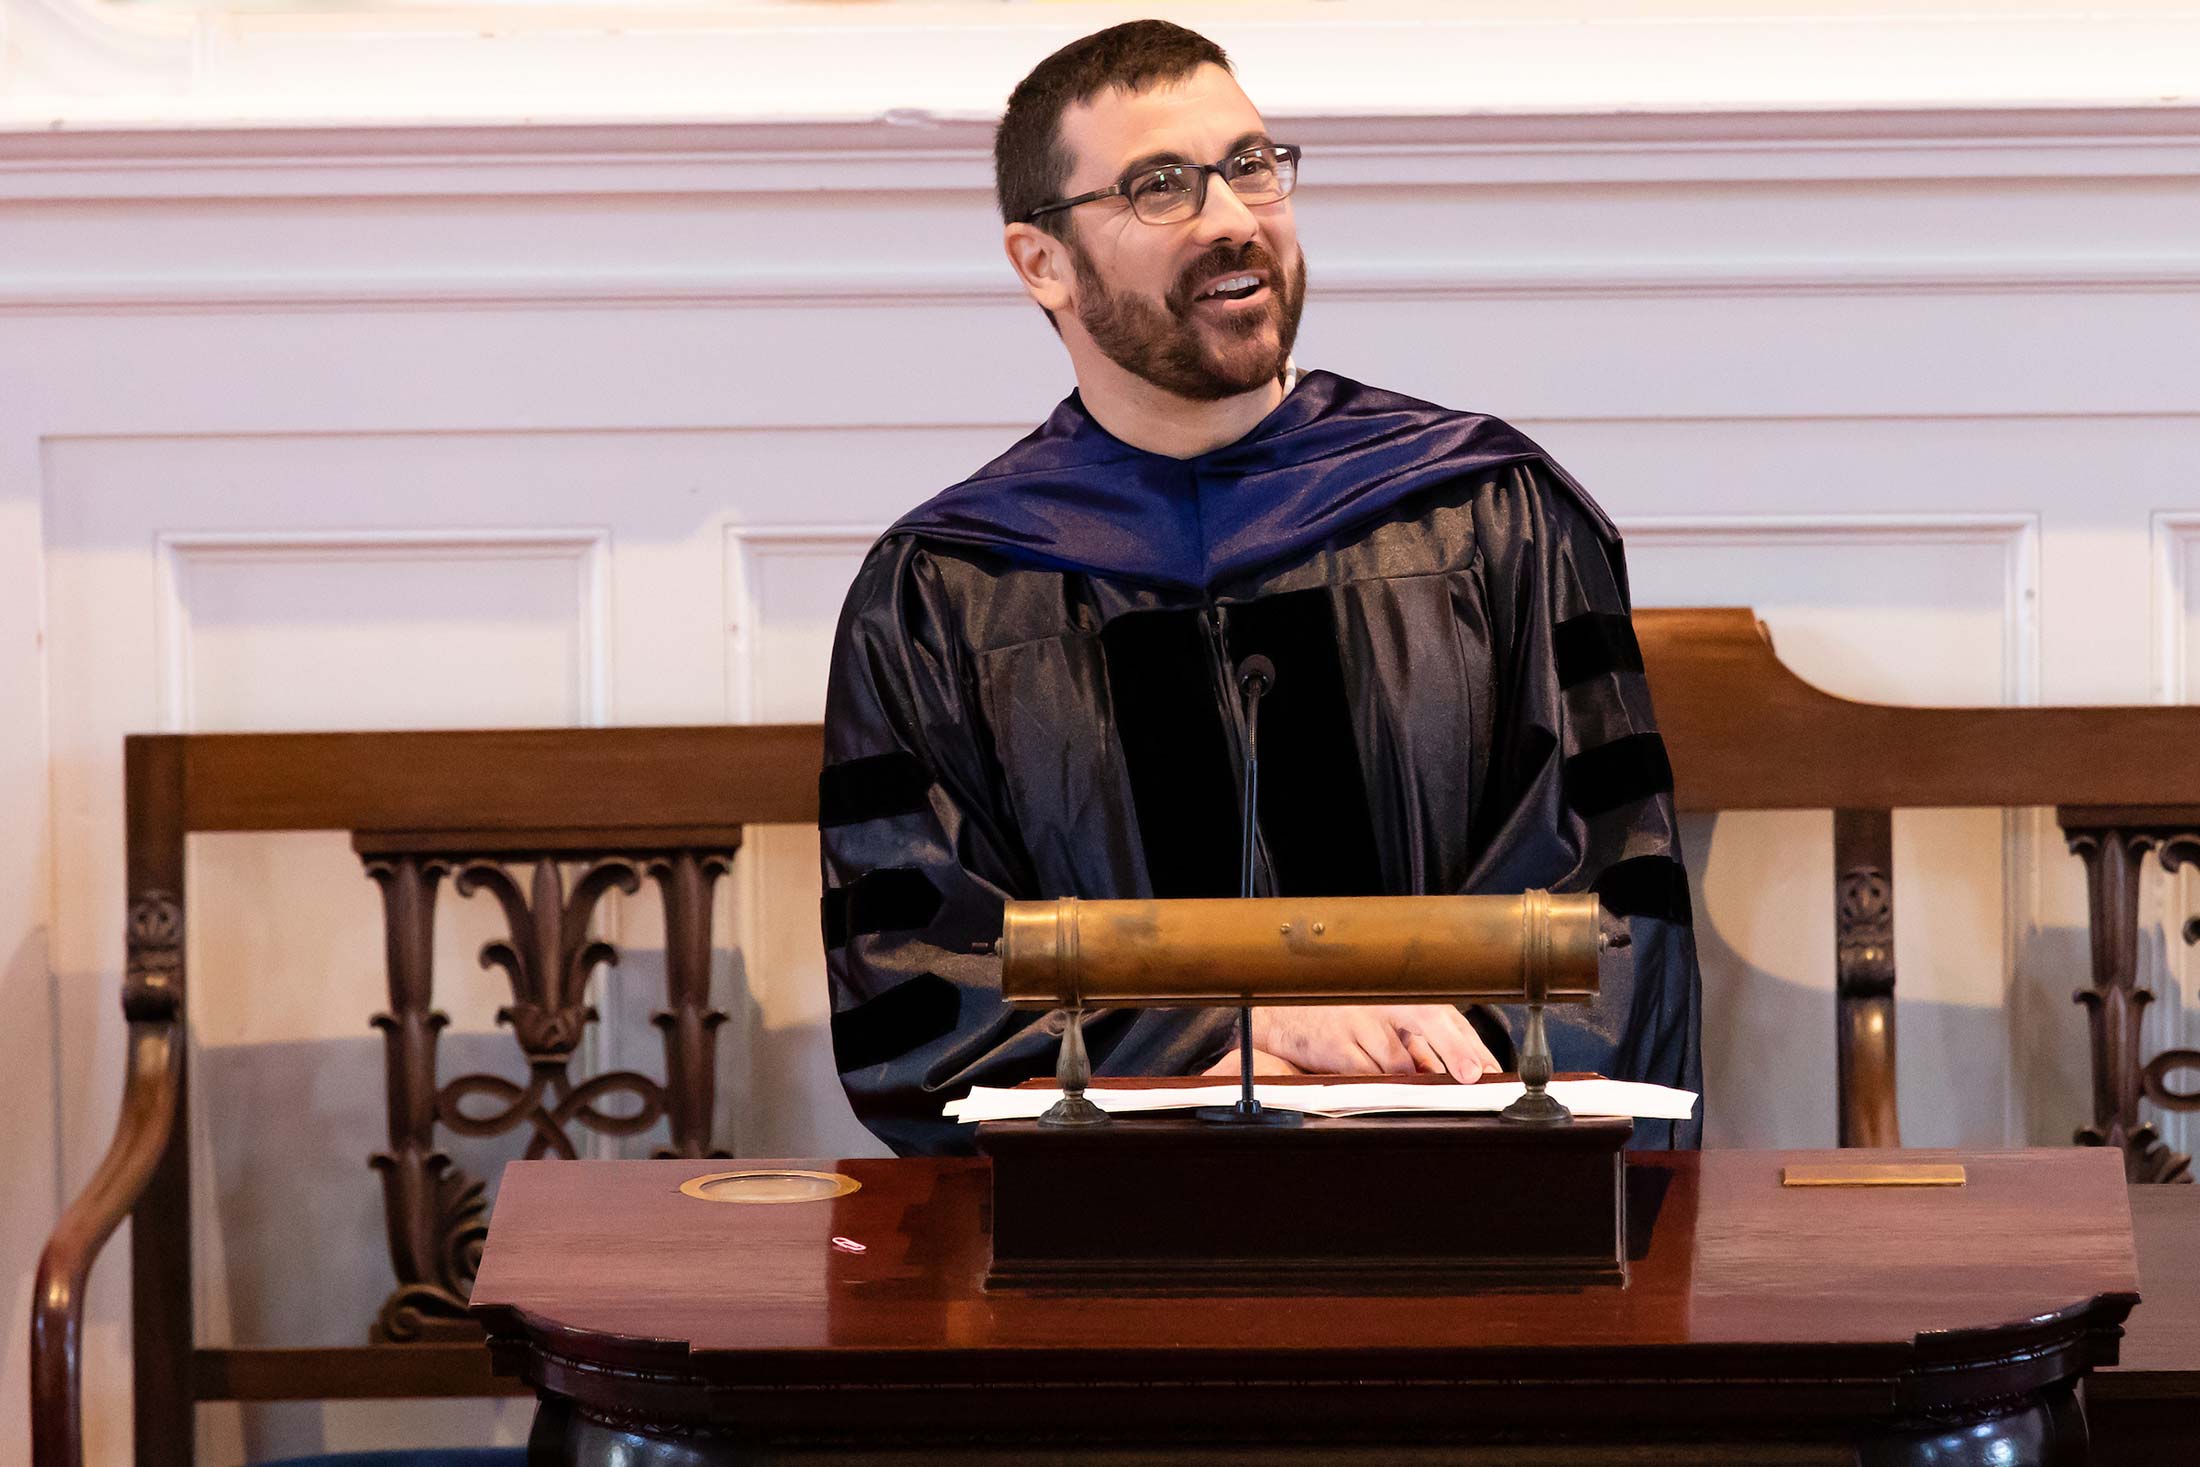 Professor Josef Trapani speaking to students during Senior Awards Assembly in Johnson Chapel at Amherst College